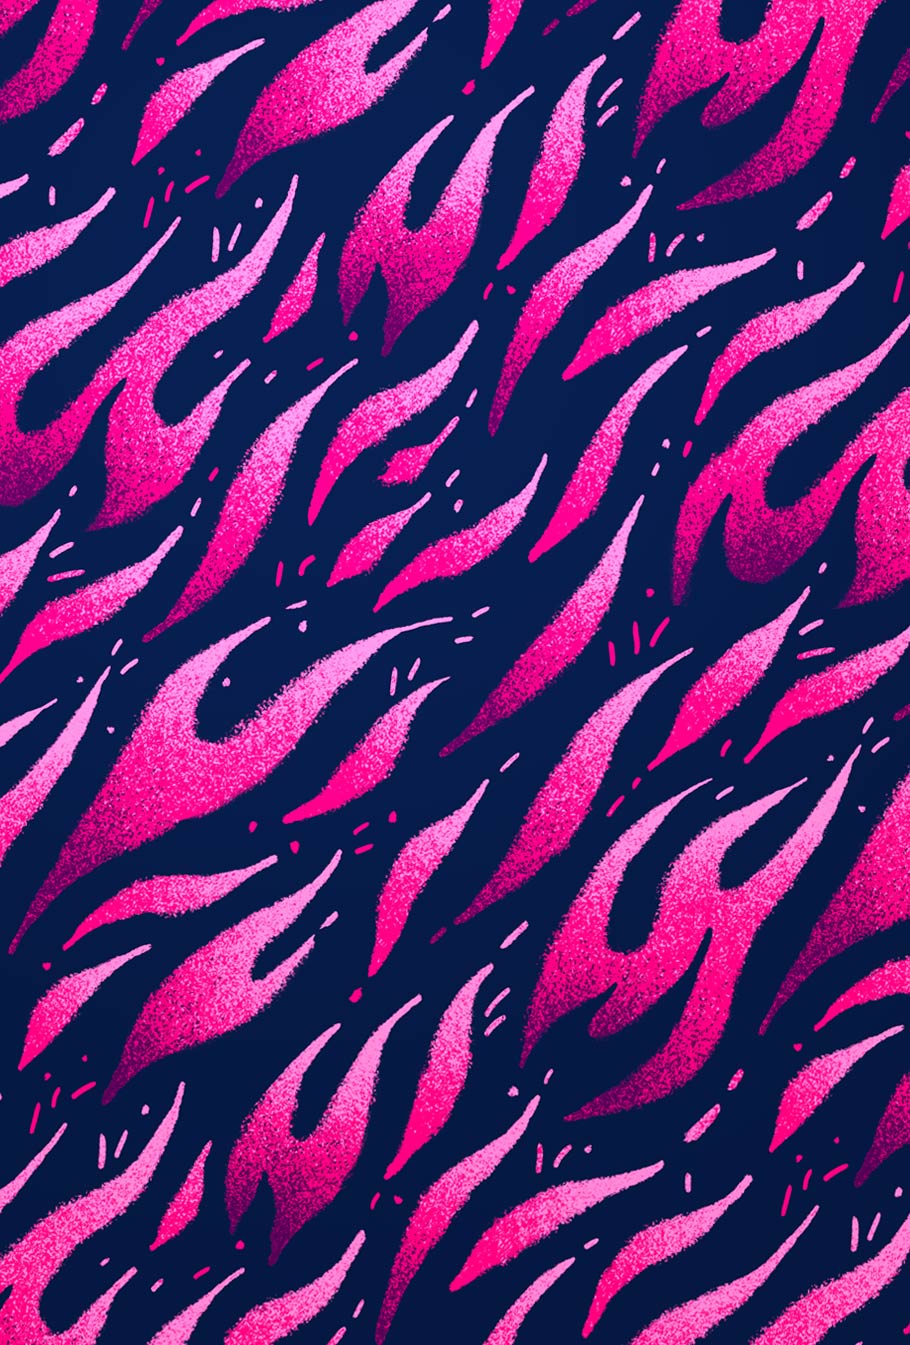 Pink flames textured repeating pattern illustration by Andrea Muller